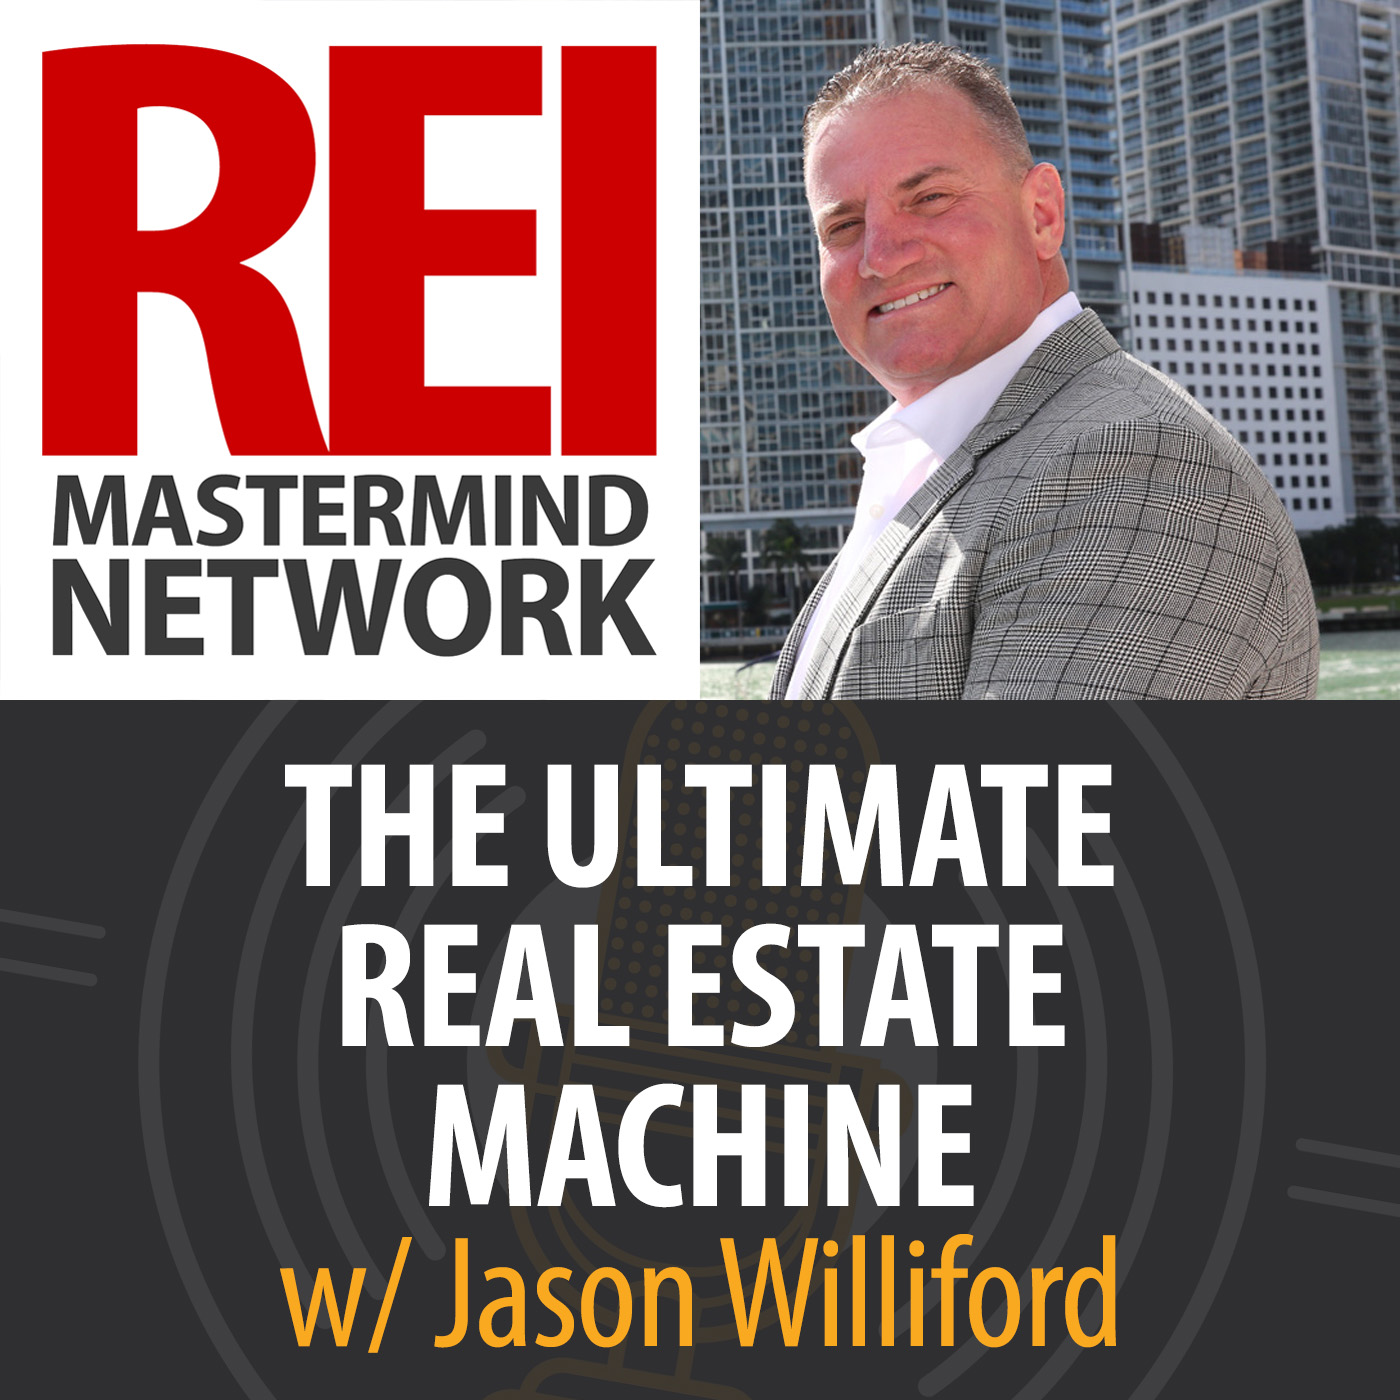 The Ultimate Real Estate Machine with Jason Williford